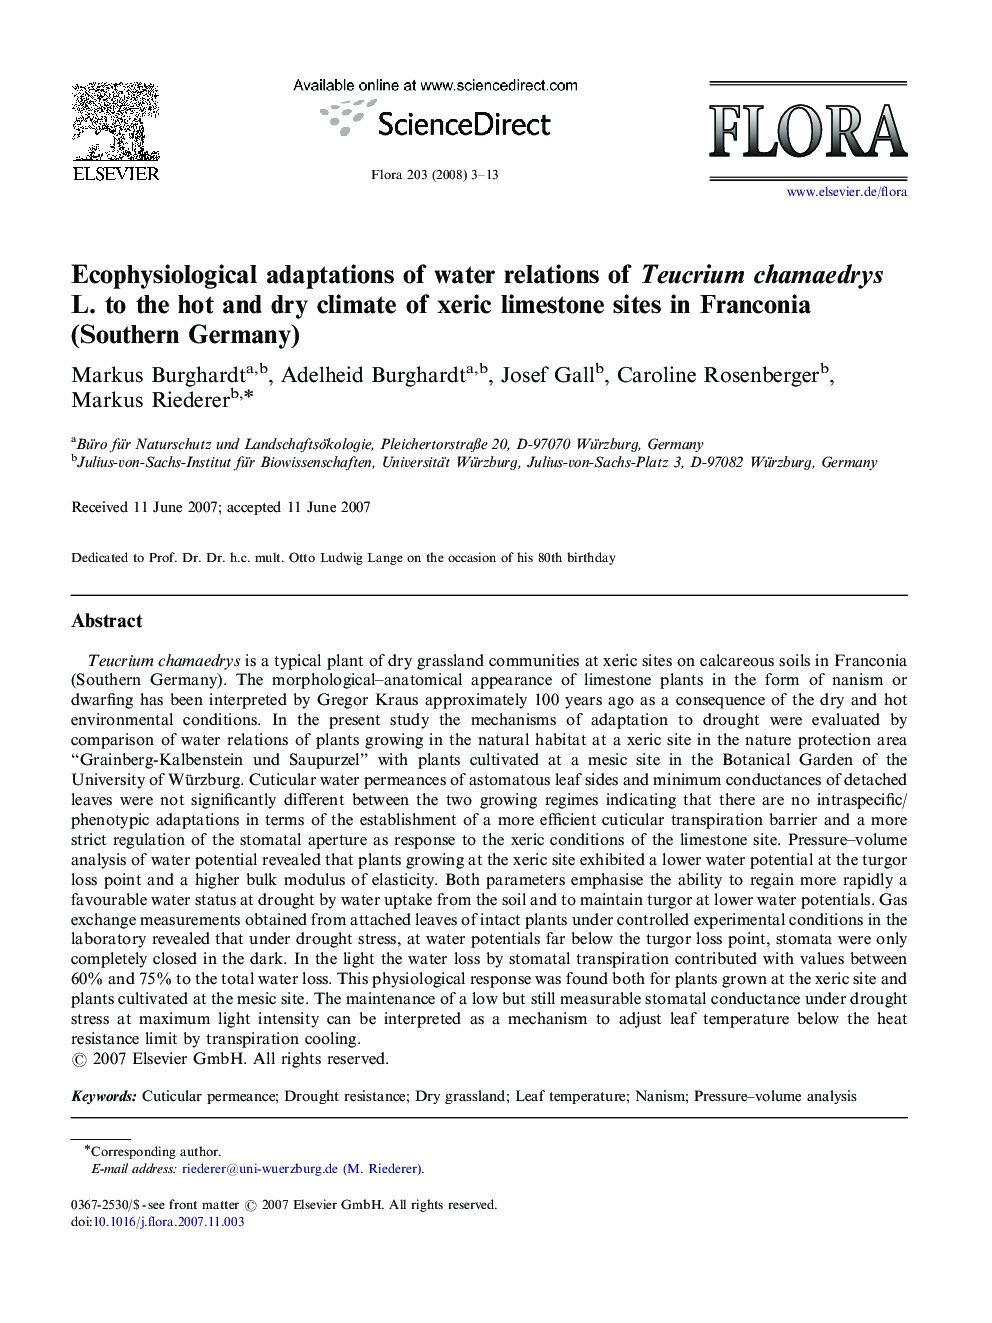 Ecophysiological adaptations of water relations of Teucrium chamaedrys L. to the hot and dry climate of xeric limestone sites in Franconia (Southern Germany)